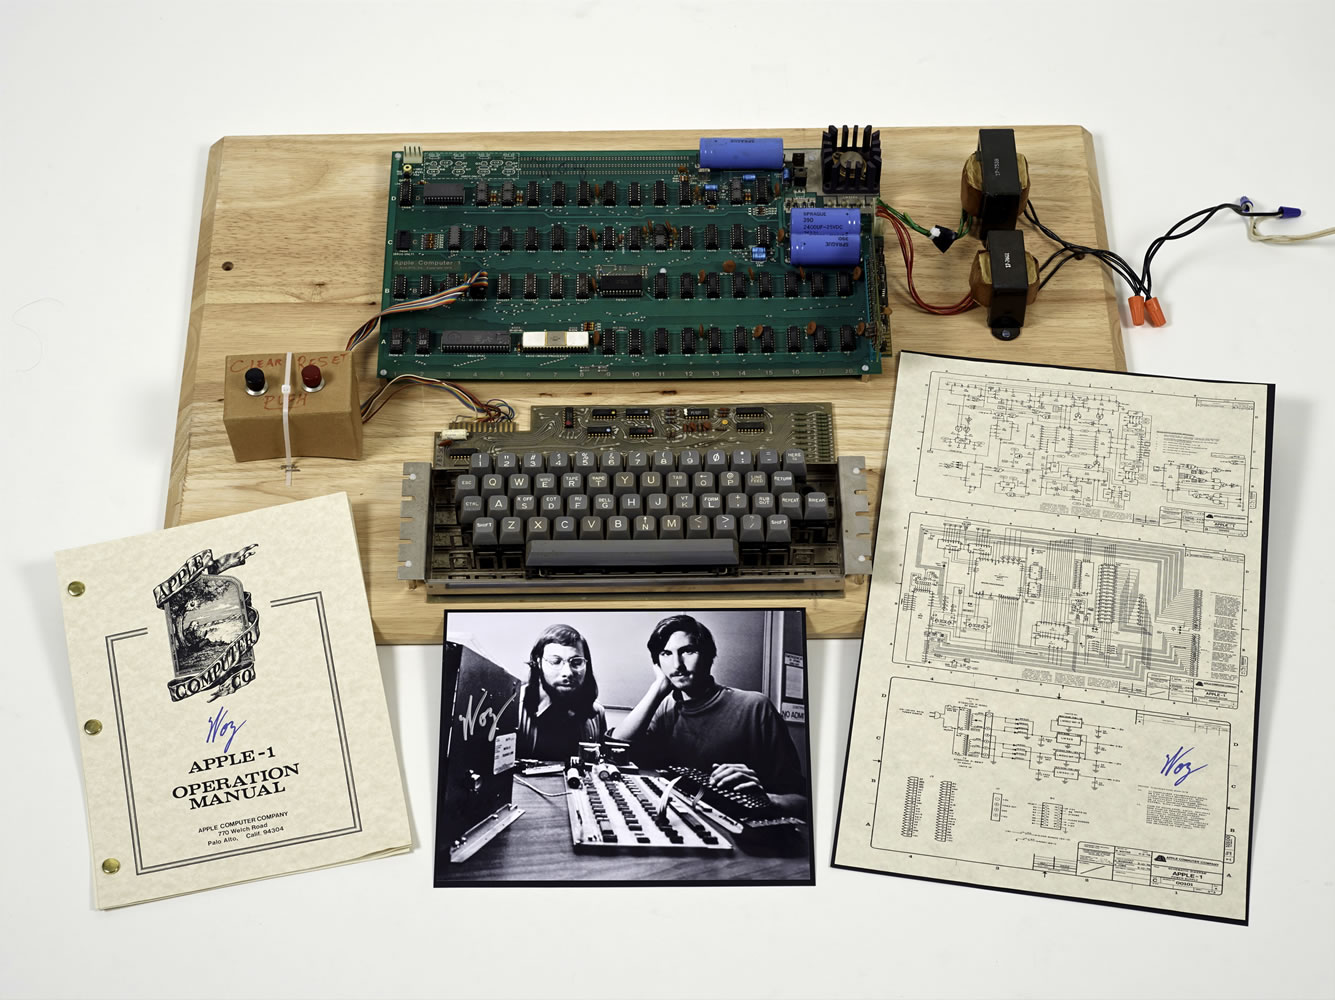 Christie's Auction House
An Apple 1 prototype computer, built in 1976, accompanied by an operation manual and schematic as well as a photo of its inventors, Steve Wozniak, left, and Steve Jobs, goes on sale later this month at Christie's Auction House, the latest in a recent run of vintage tech sales that have attracted some eye-popping prices. The Apple 1 could go for $500,000.